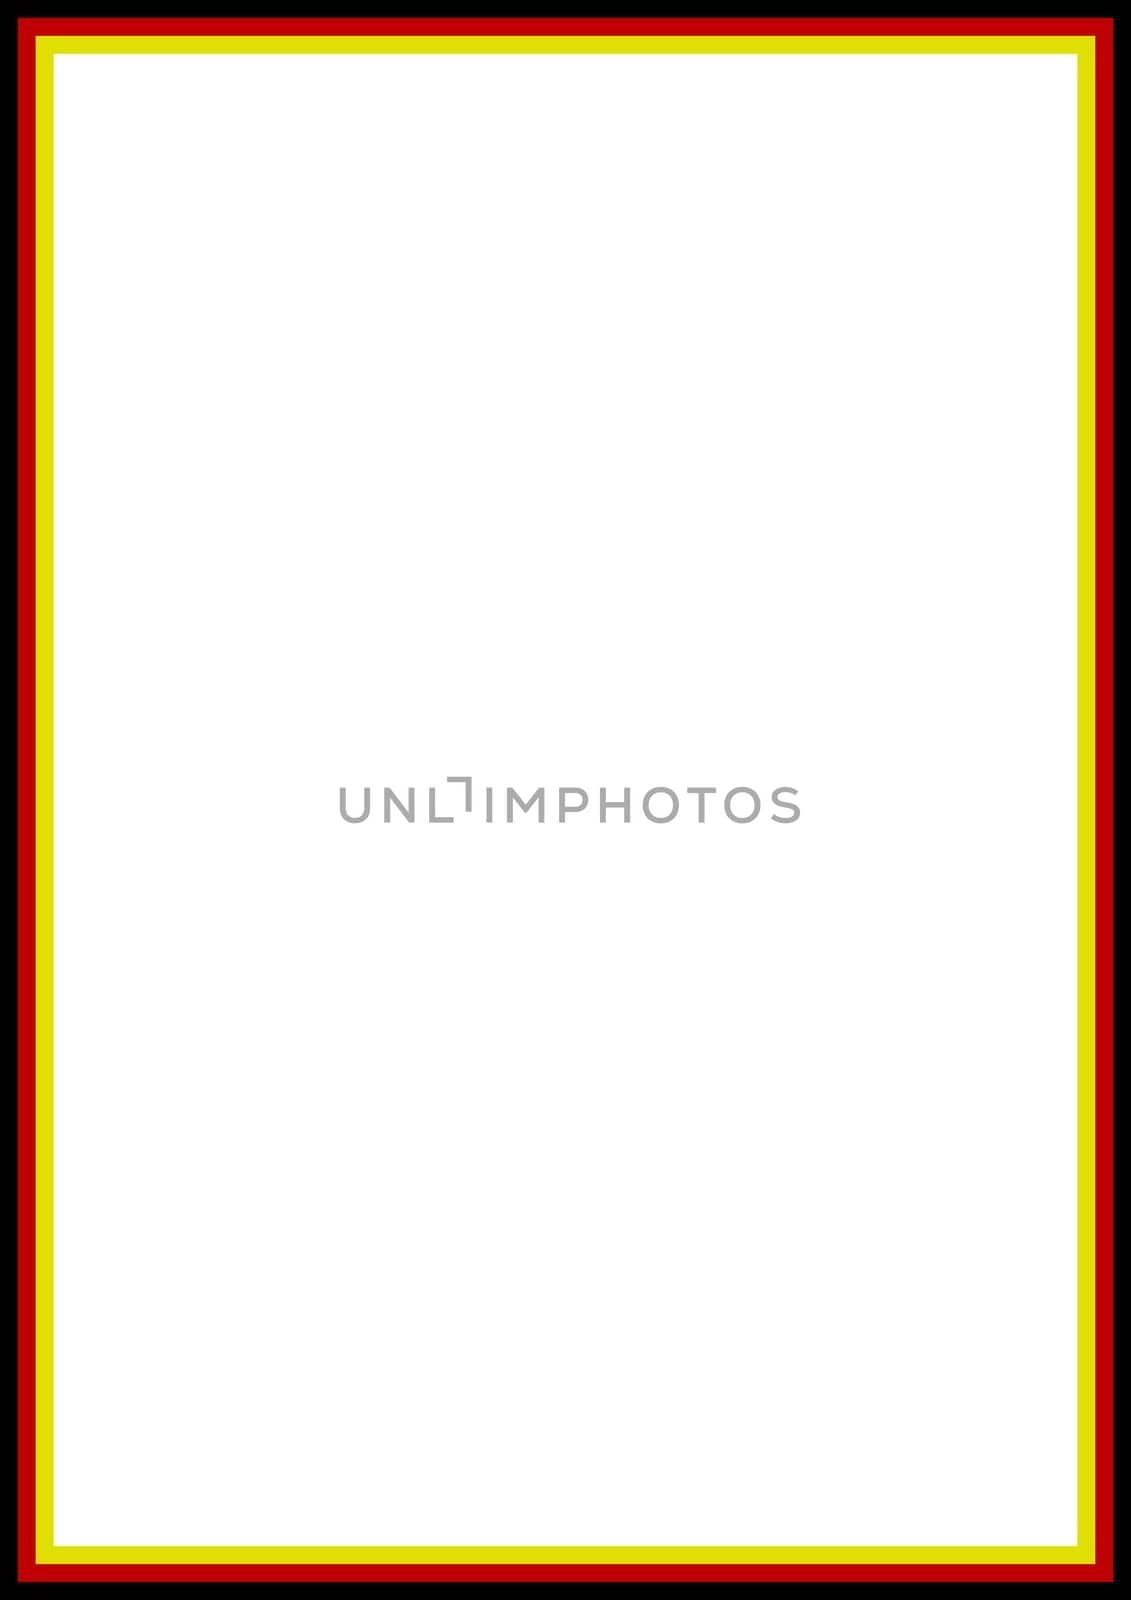 Blank template of German letterhead paper with Germany flag border